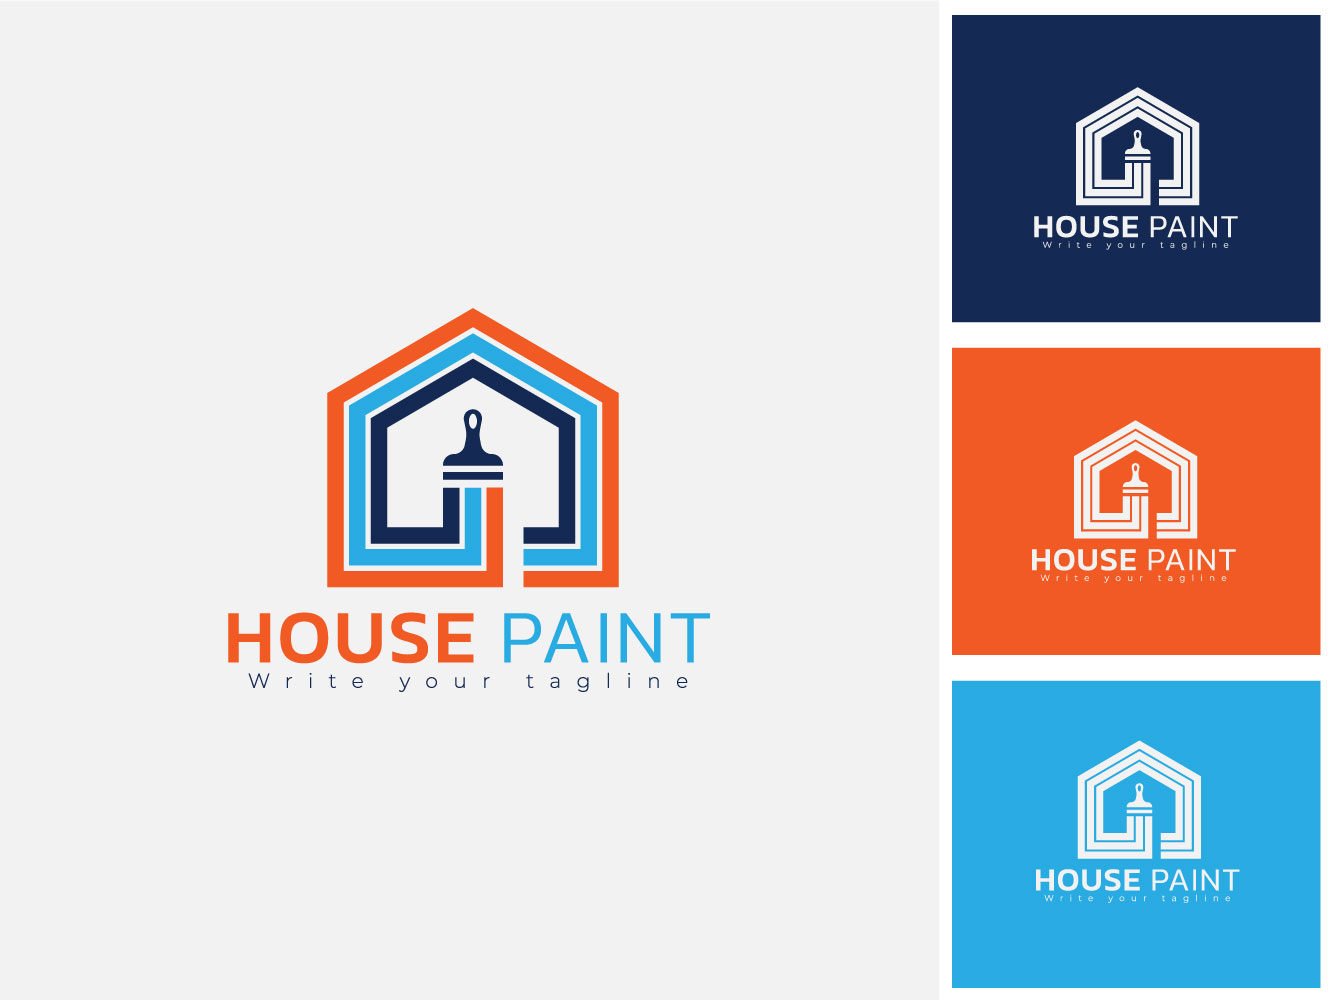 Minimal House Painting Logo Design, Concept For Home Decoration